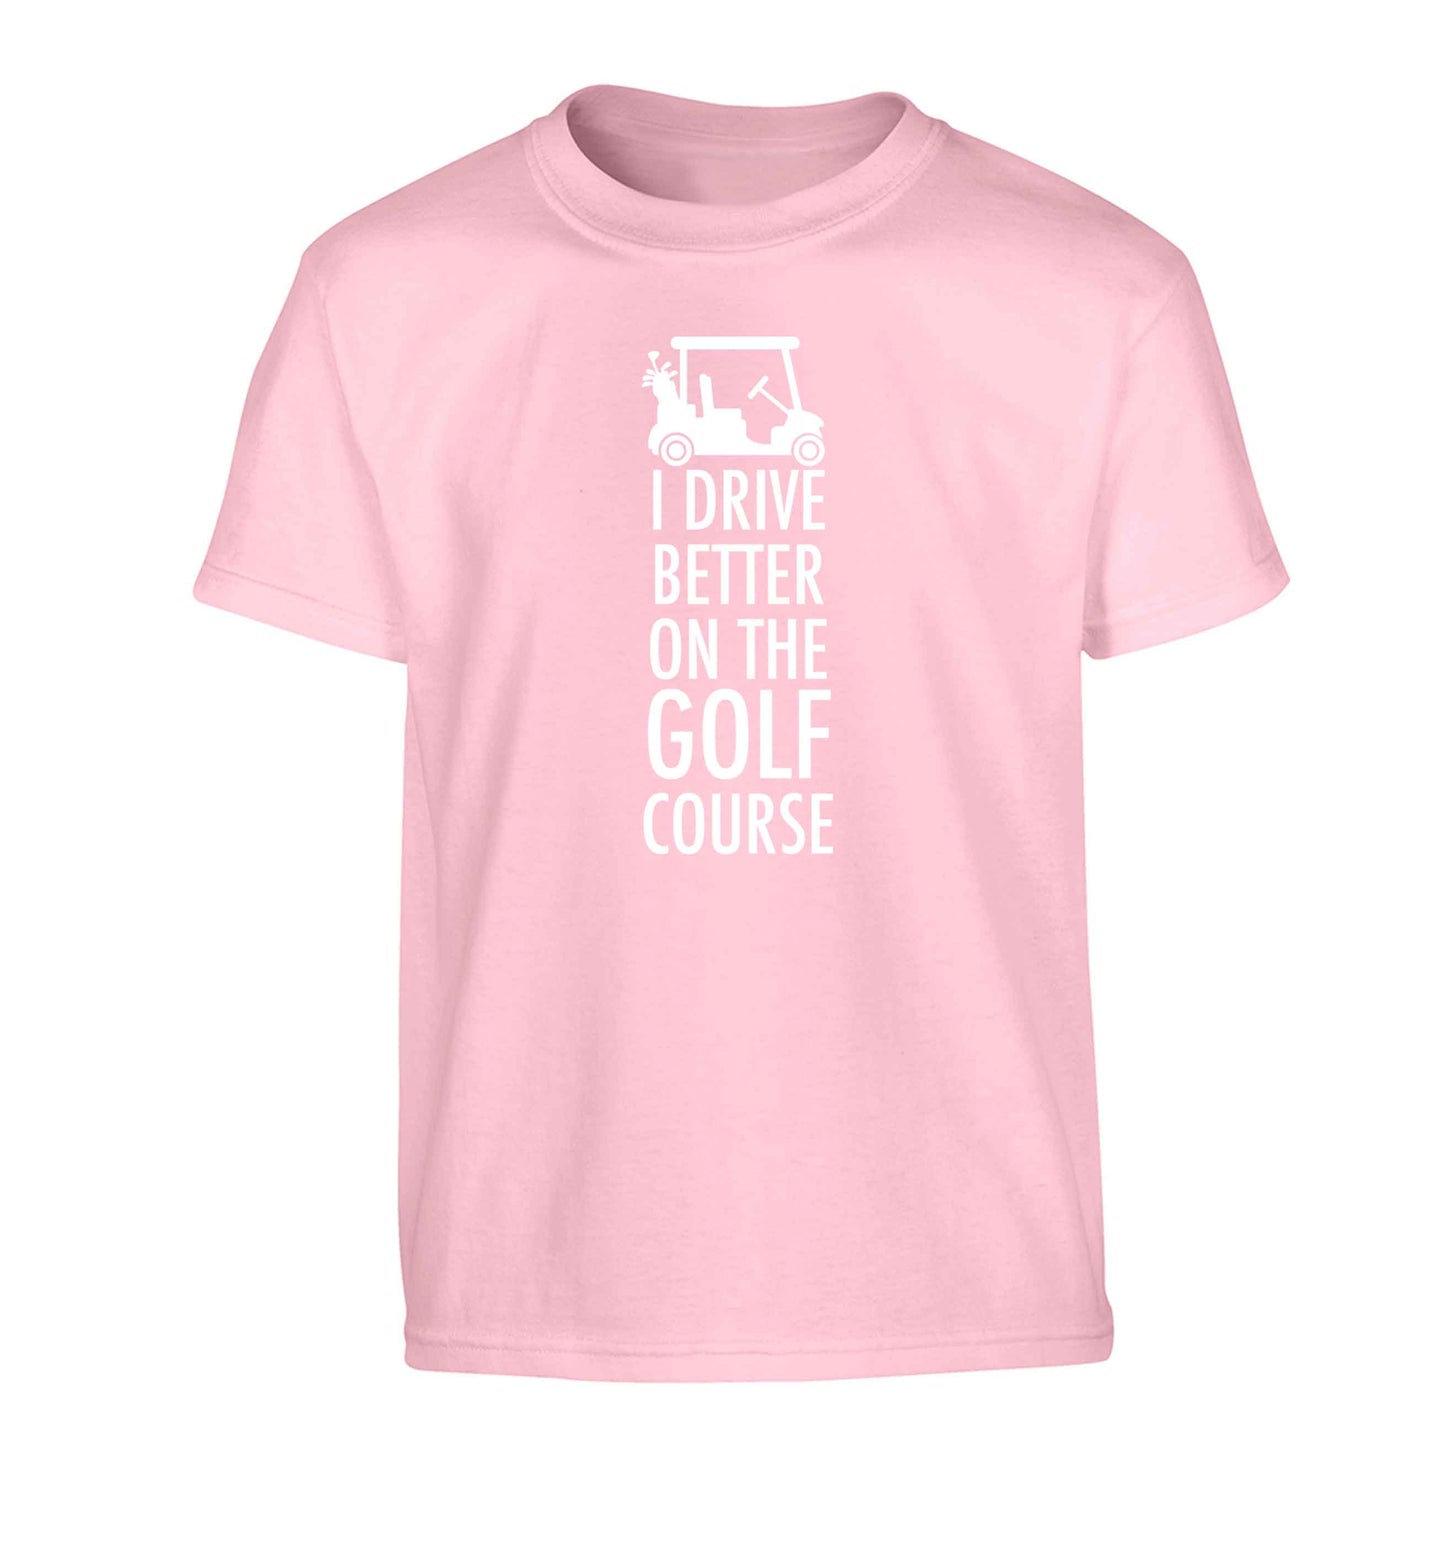 I drive better on the golf course Children's light pink Tshirt 12-13 Years